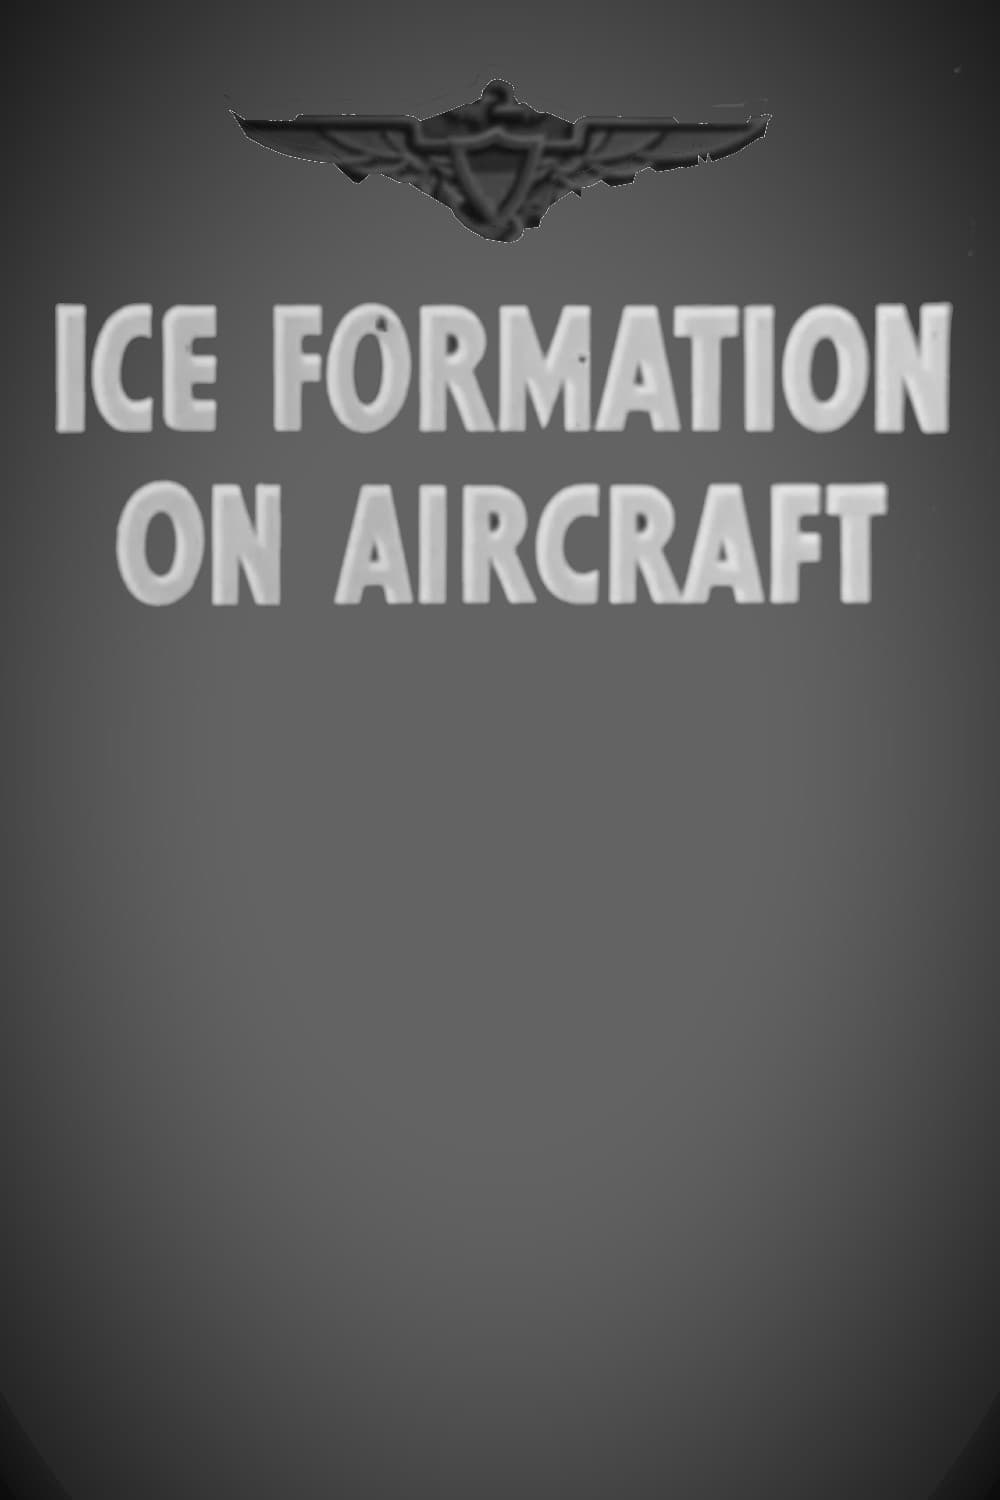 Ice Formation on Aircraft